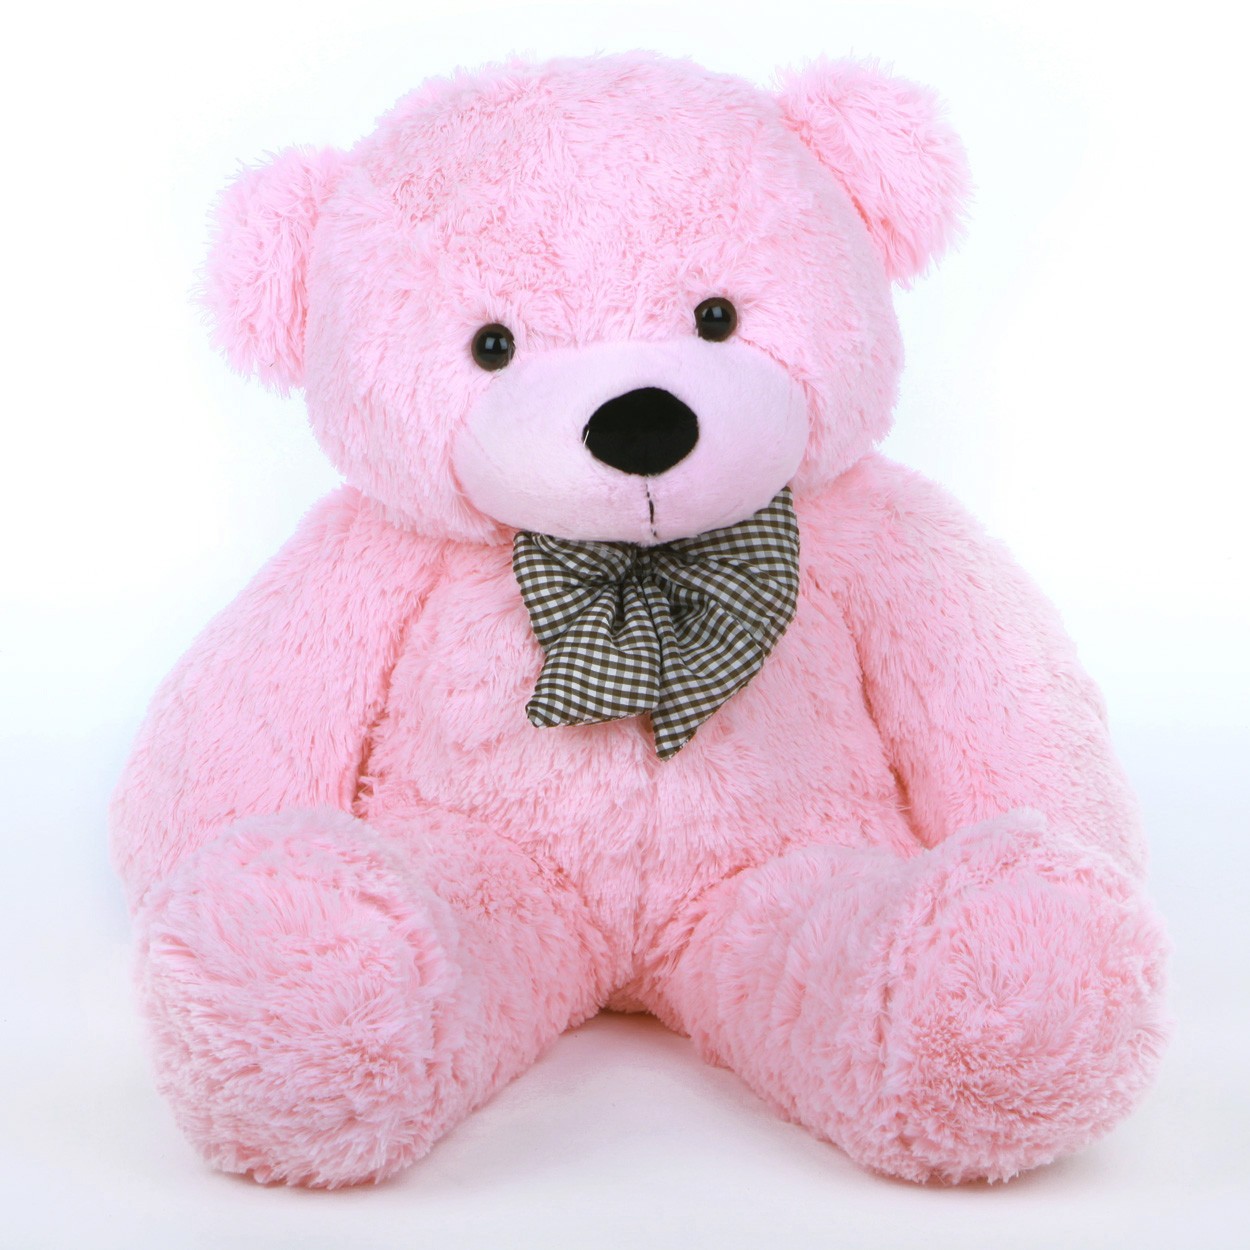 Lovely and Cute Pink Teddy Bear - Colors Photo (34605173 